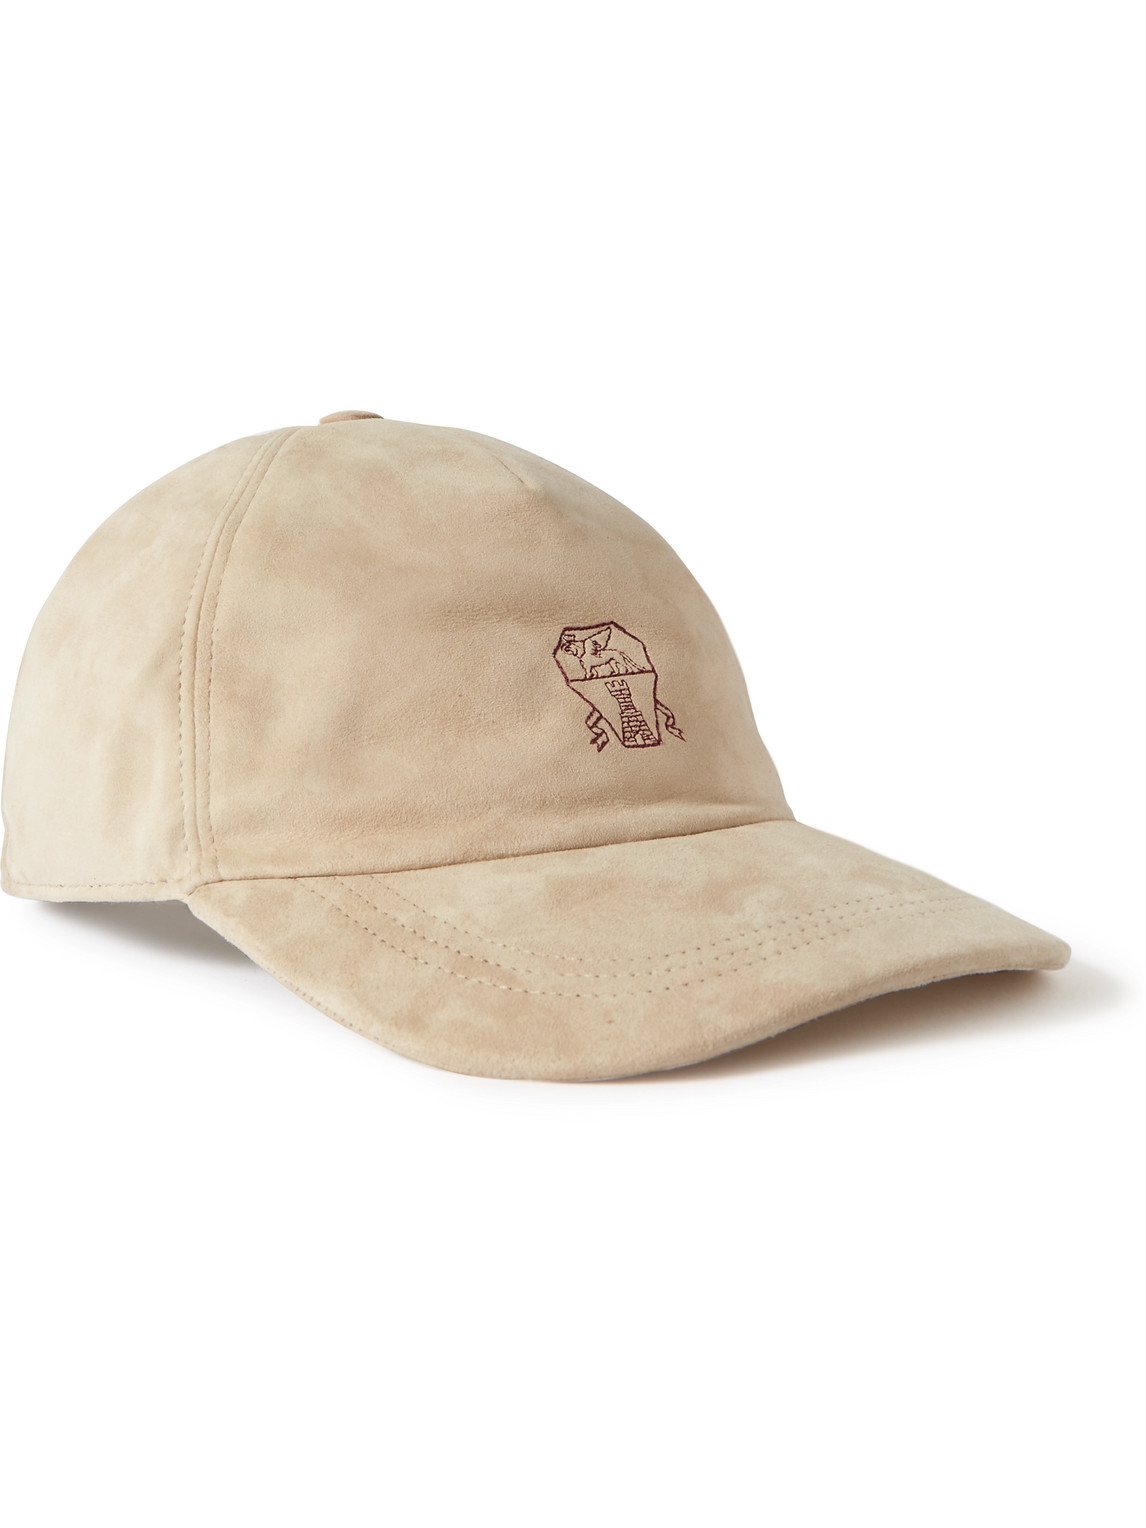 Brunello Cucinelli Logo-embroidered Suede Baseball Cap in Natural Womens Mens Accessories Mens Hats 